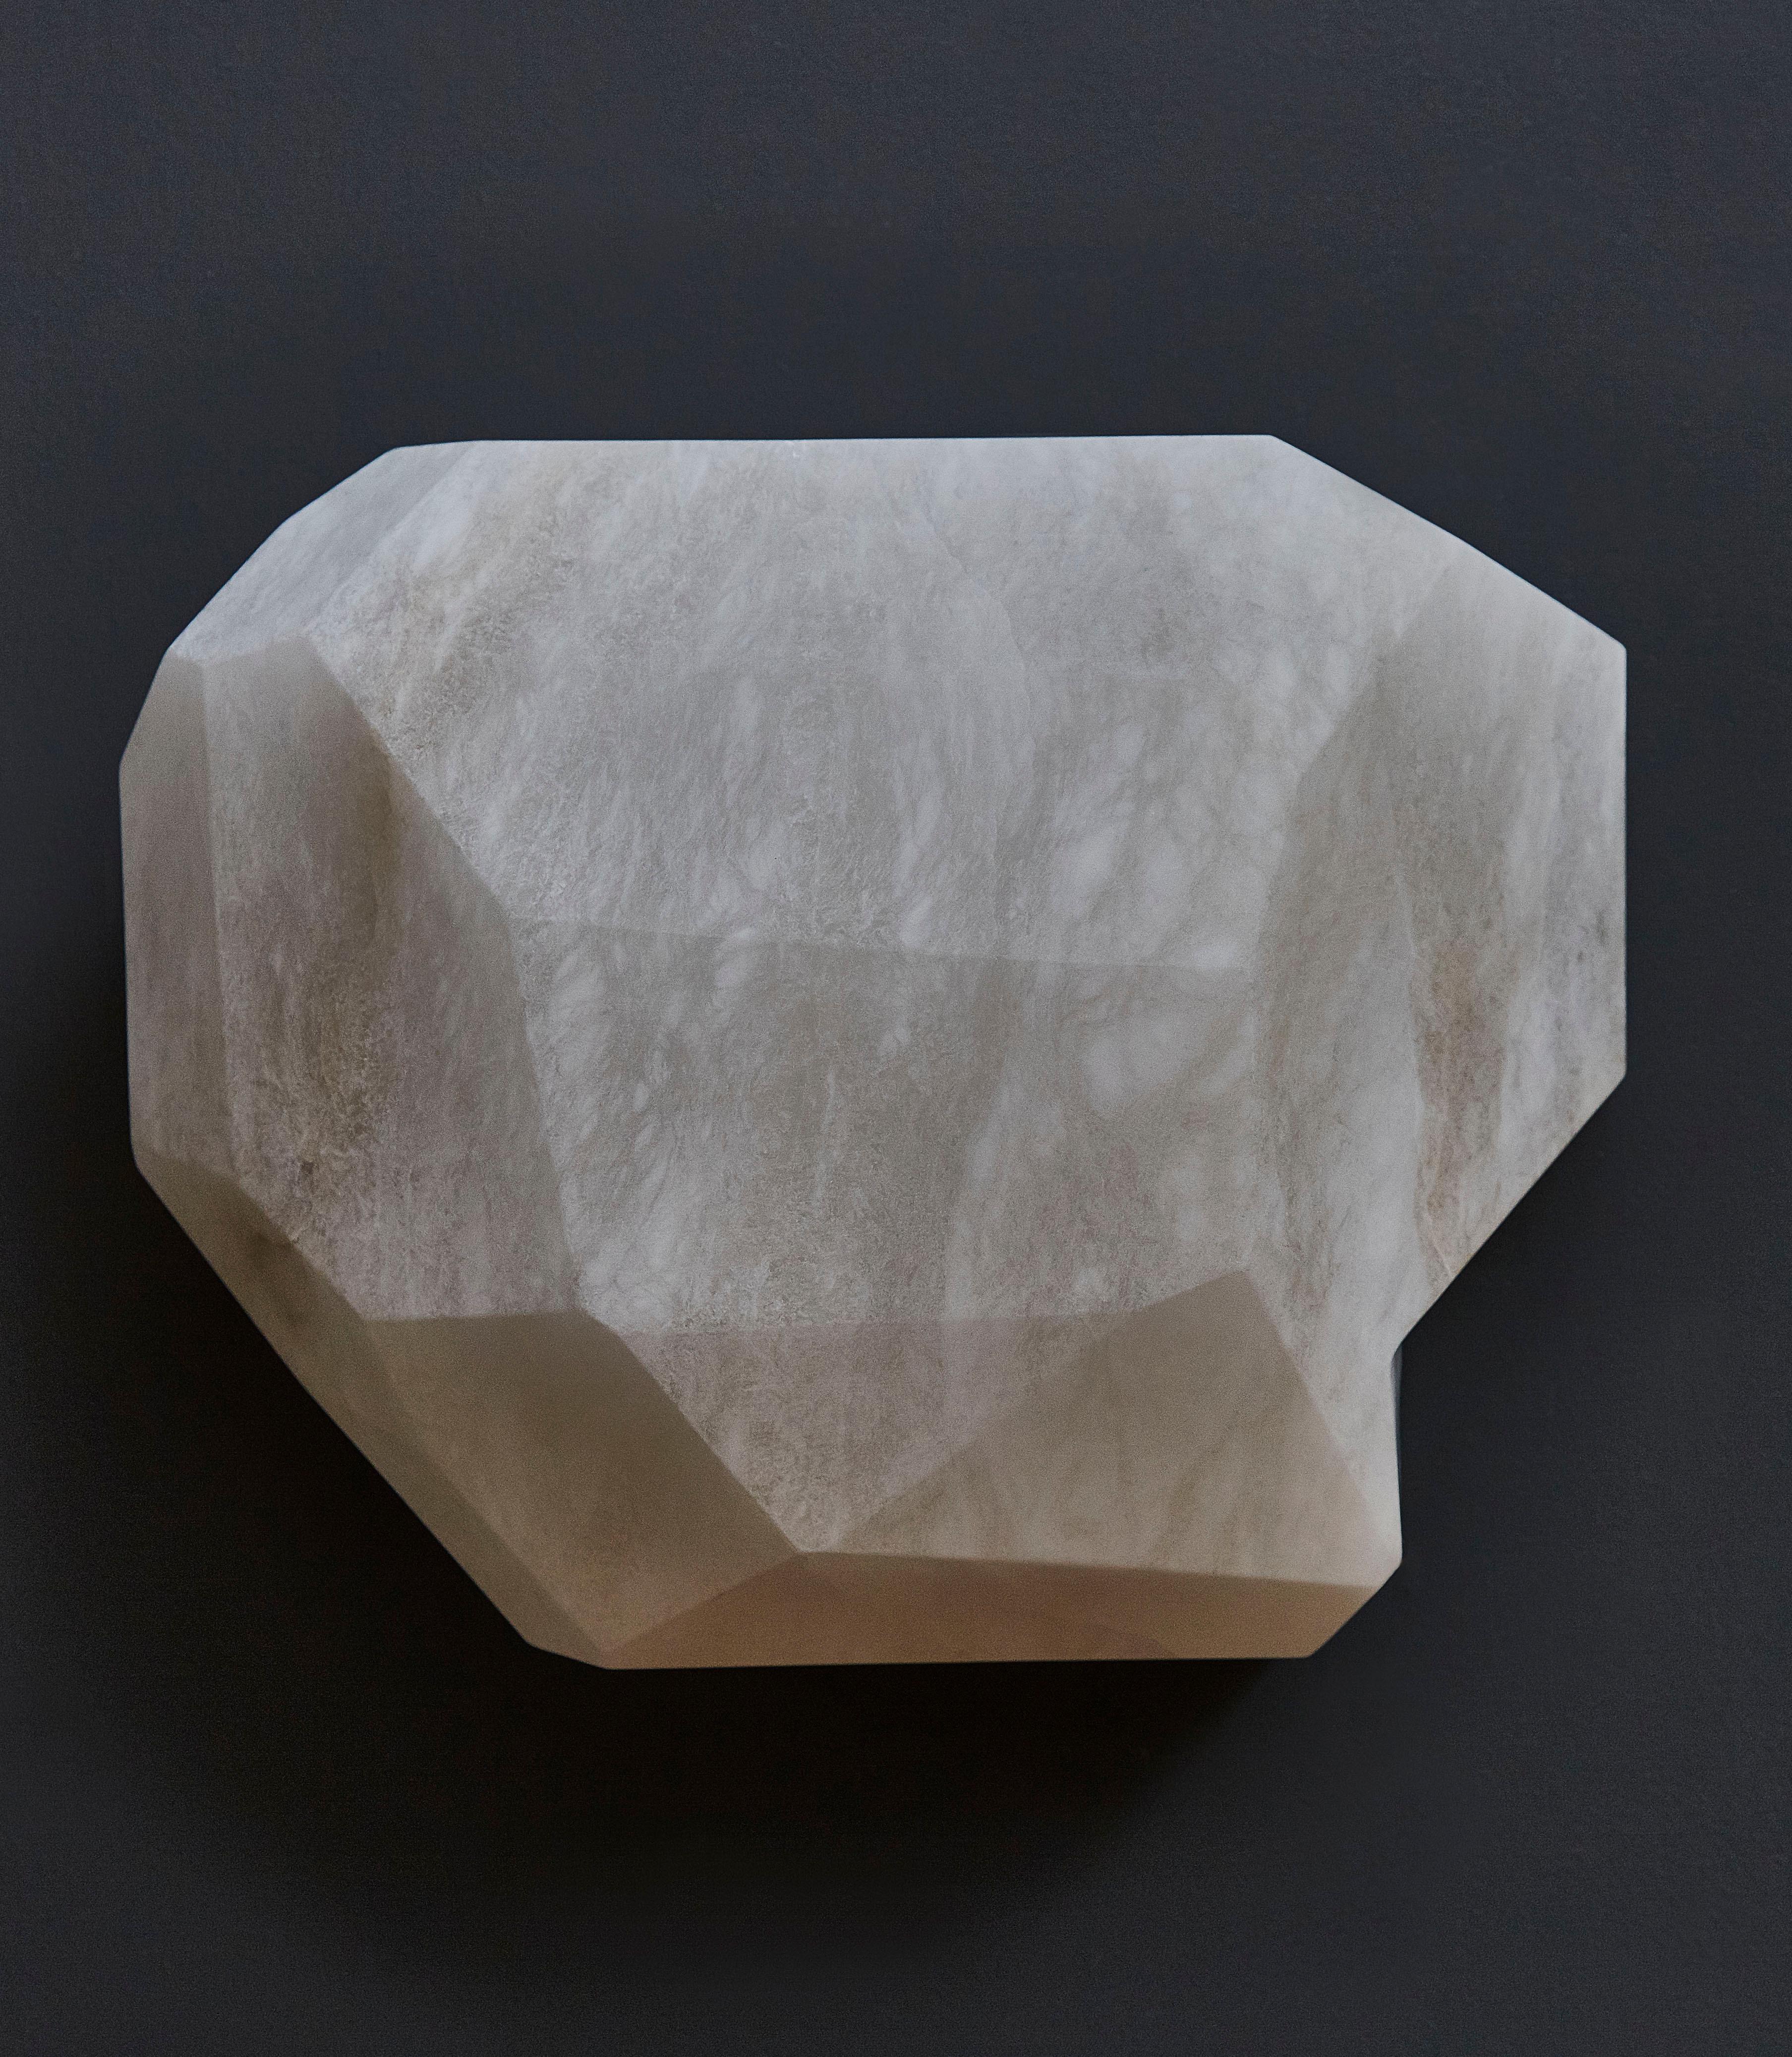 Wall sconce made of a single block of alabaster sculpted and carved to receive an inner light.